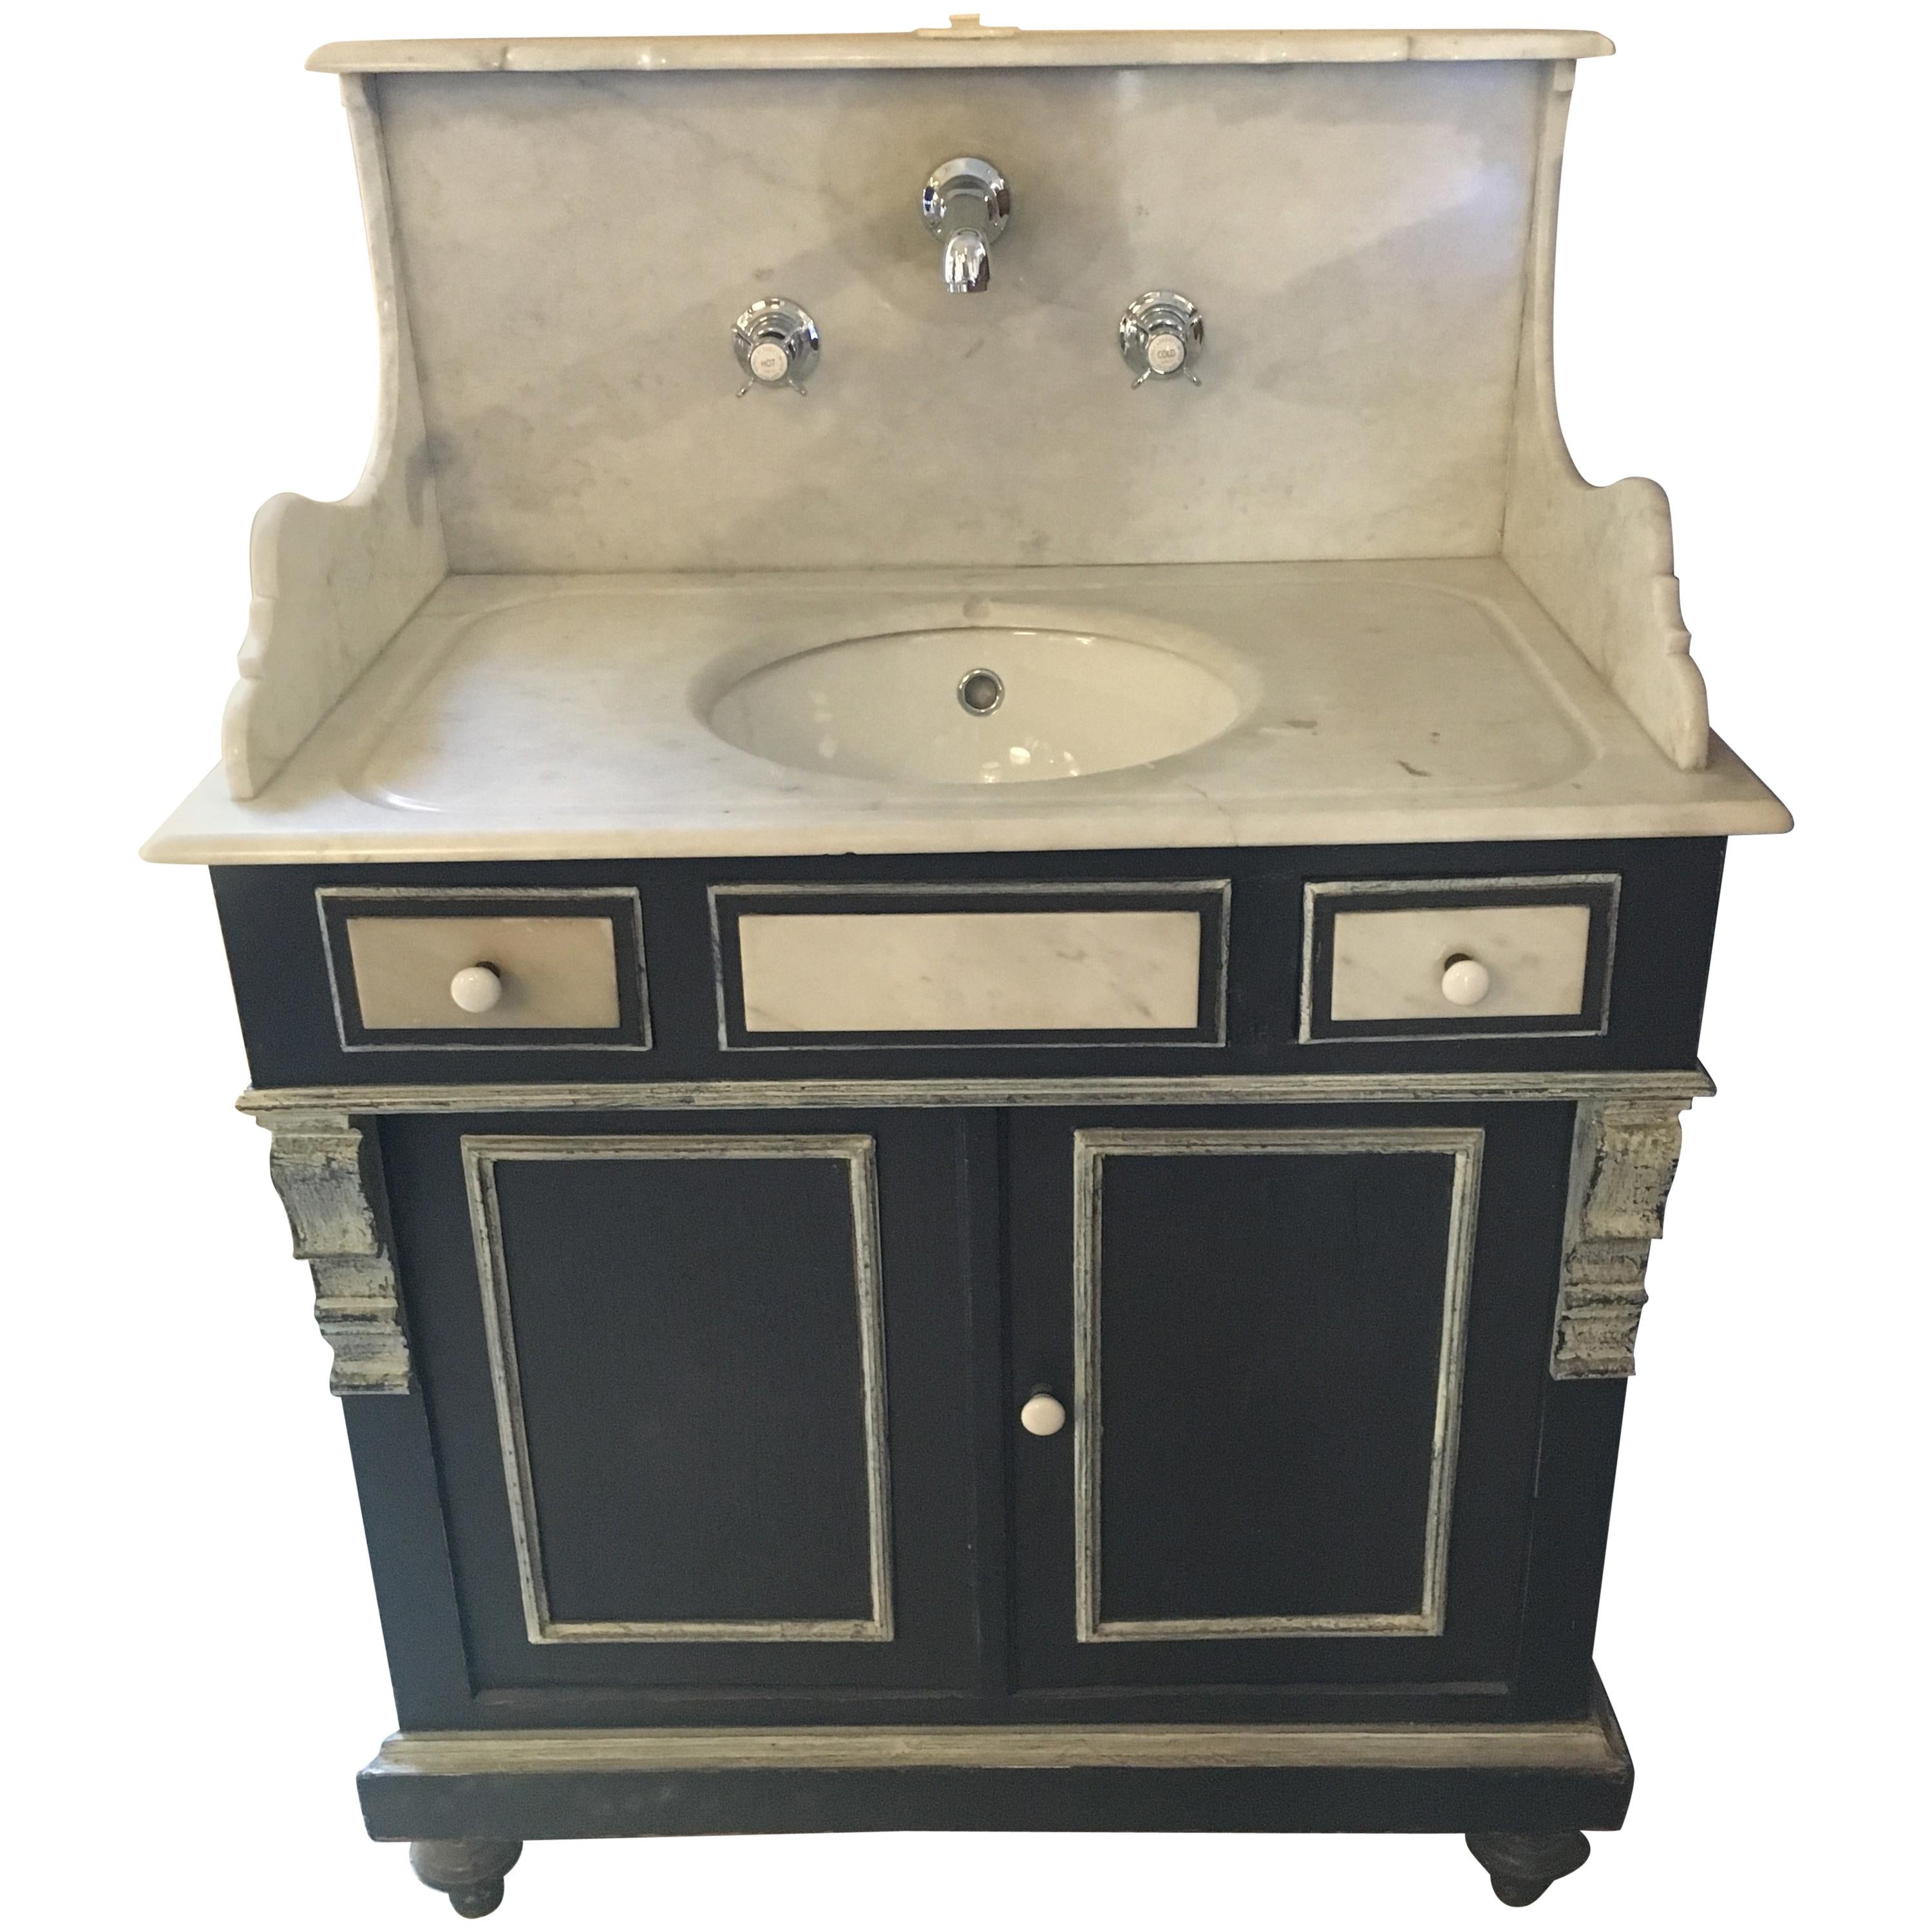 19th Century French Lacquered Wood Cupboard Sink with Carrara Marble Top, 1890s For Sale